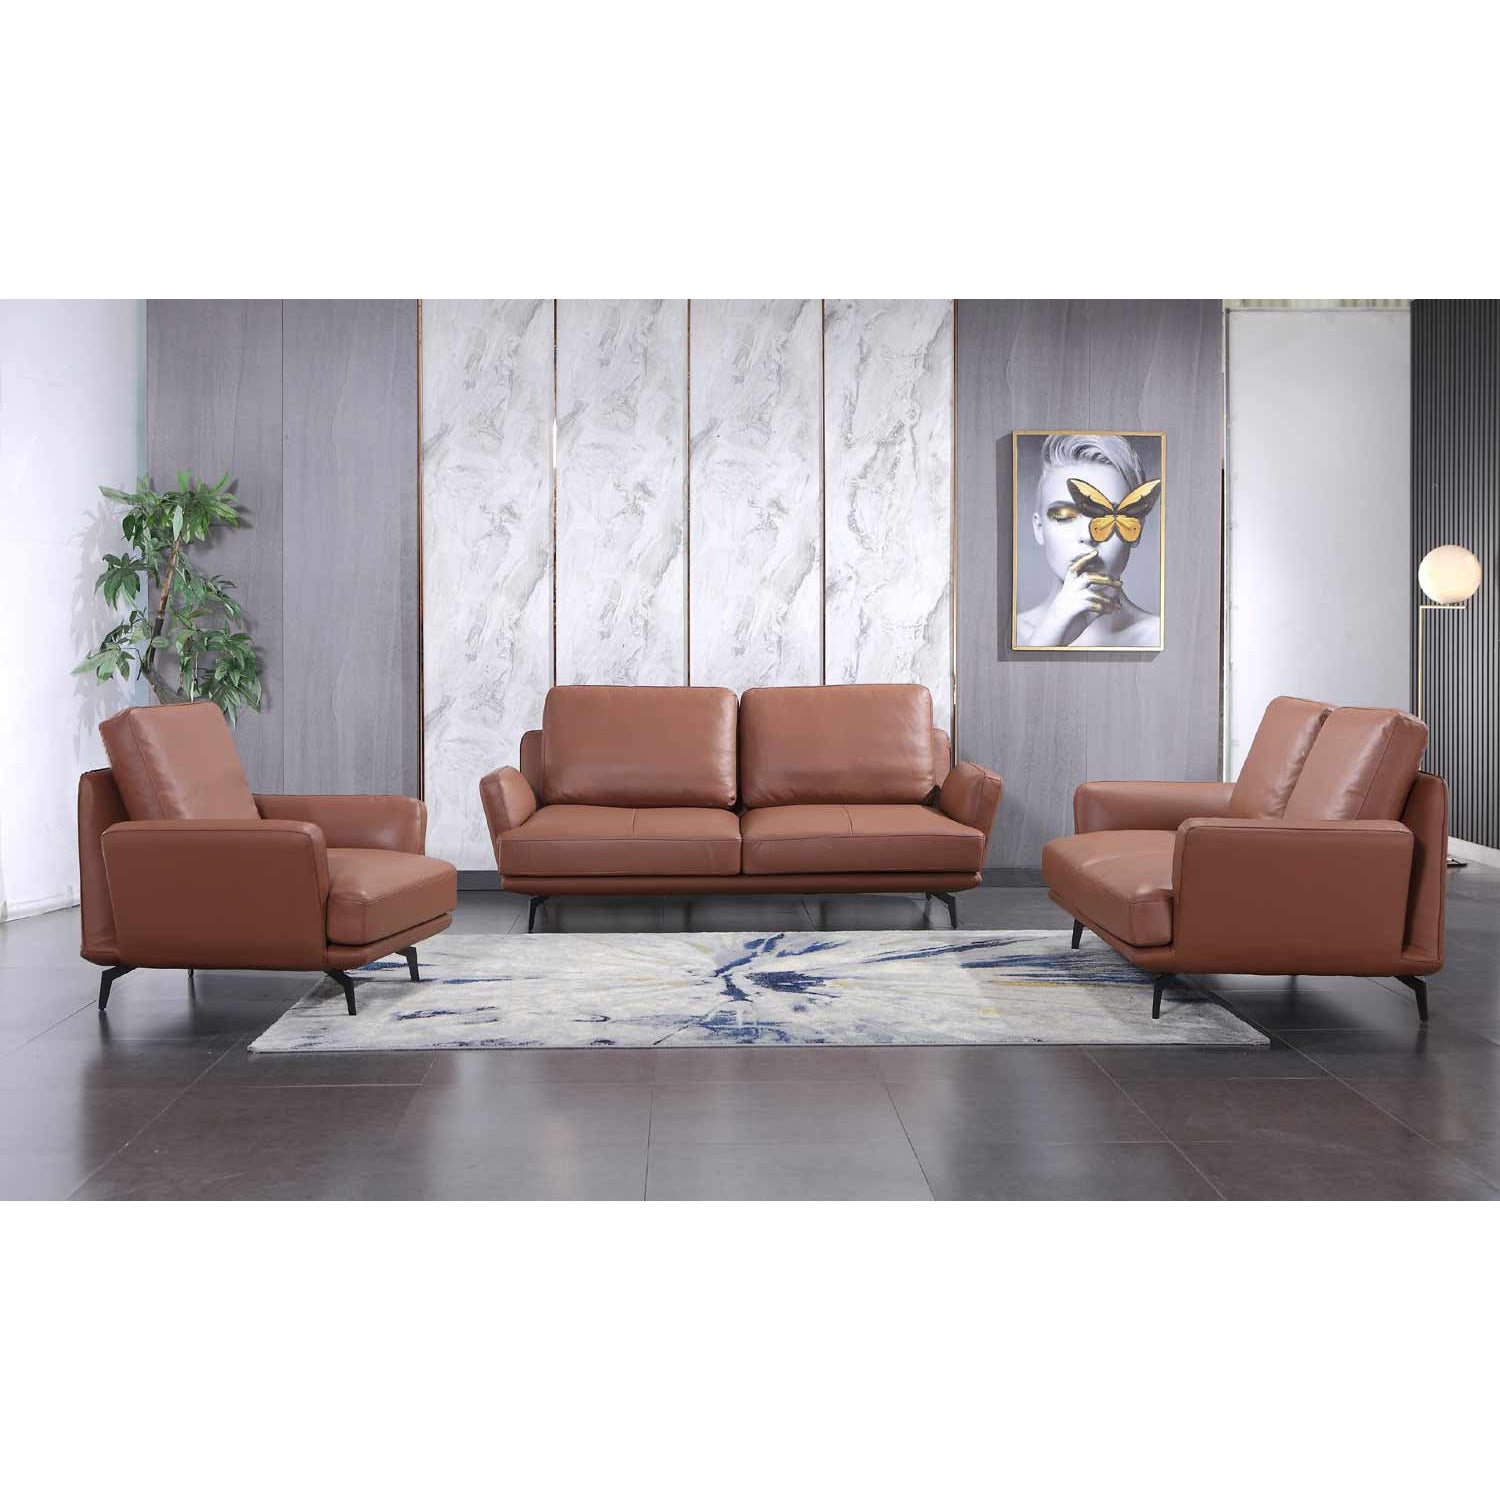 European Furniture - Tratto Loveseat in Russet Brown - 37455-L - New Star Living